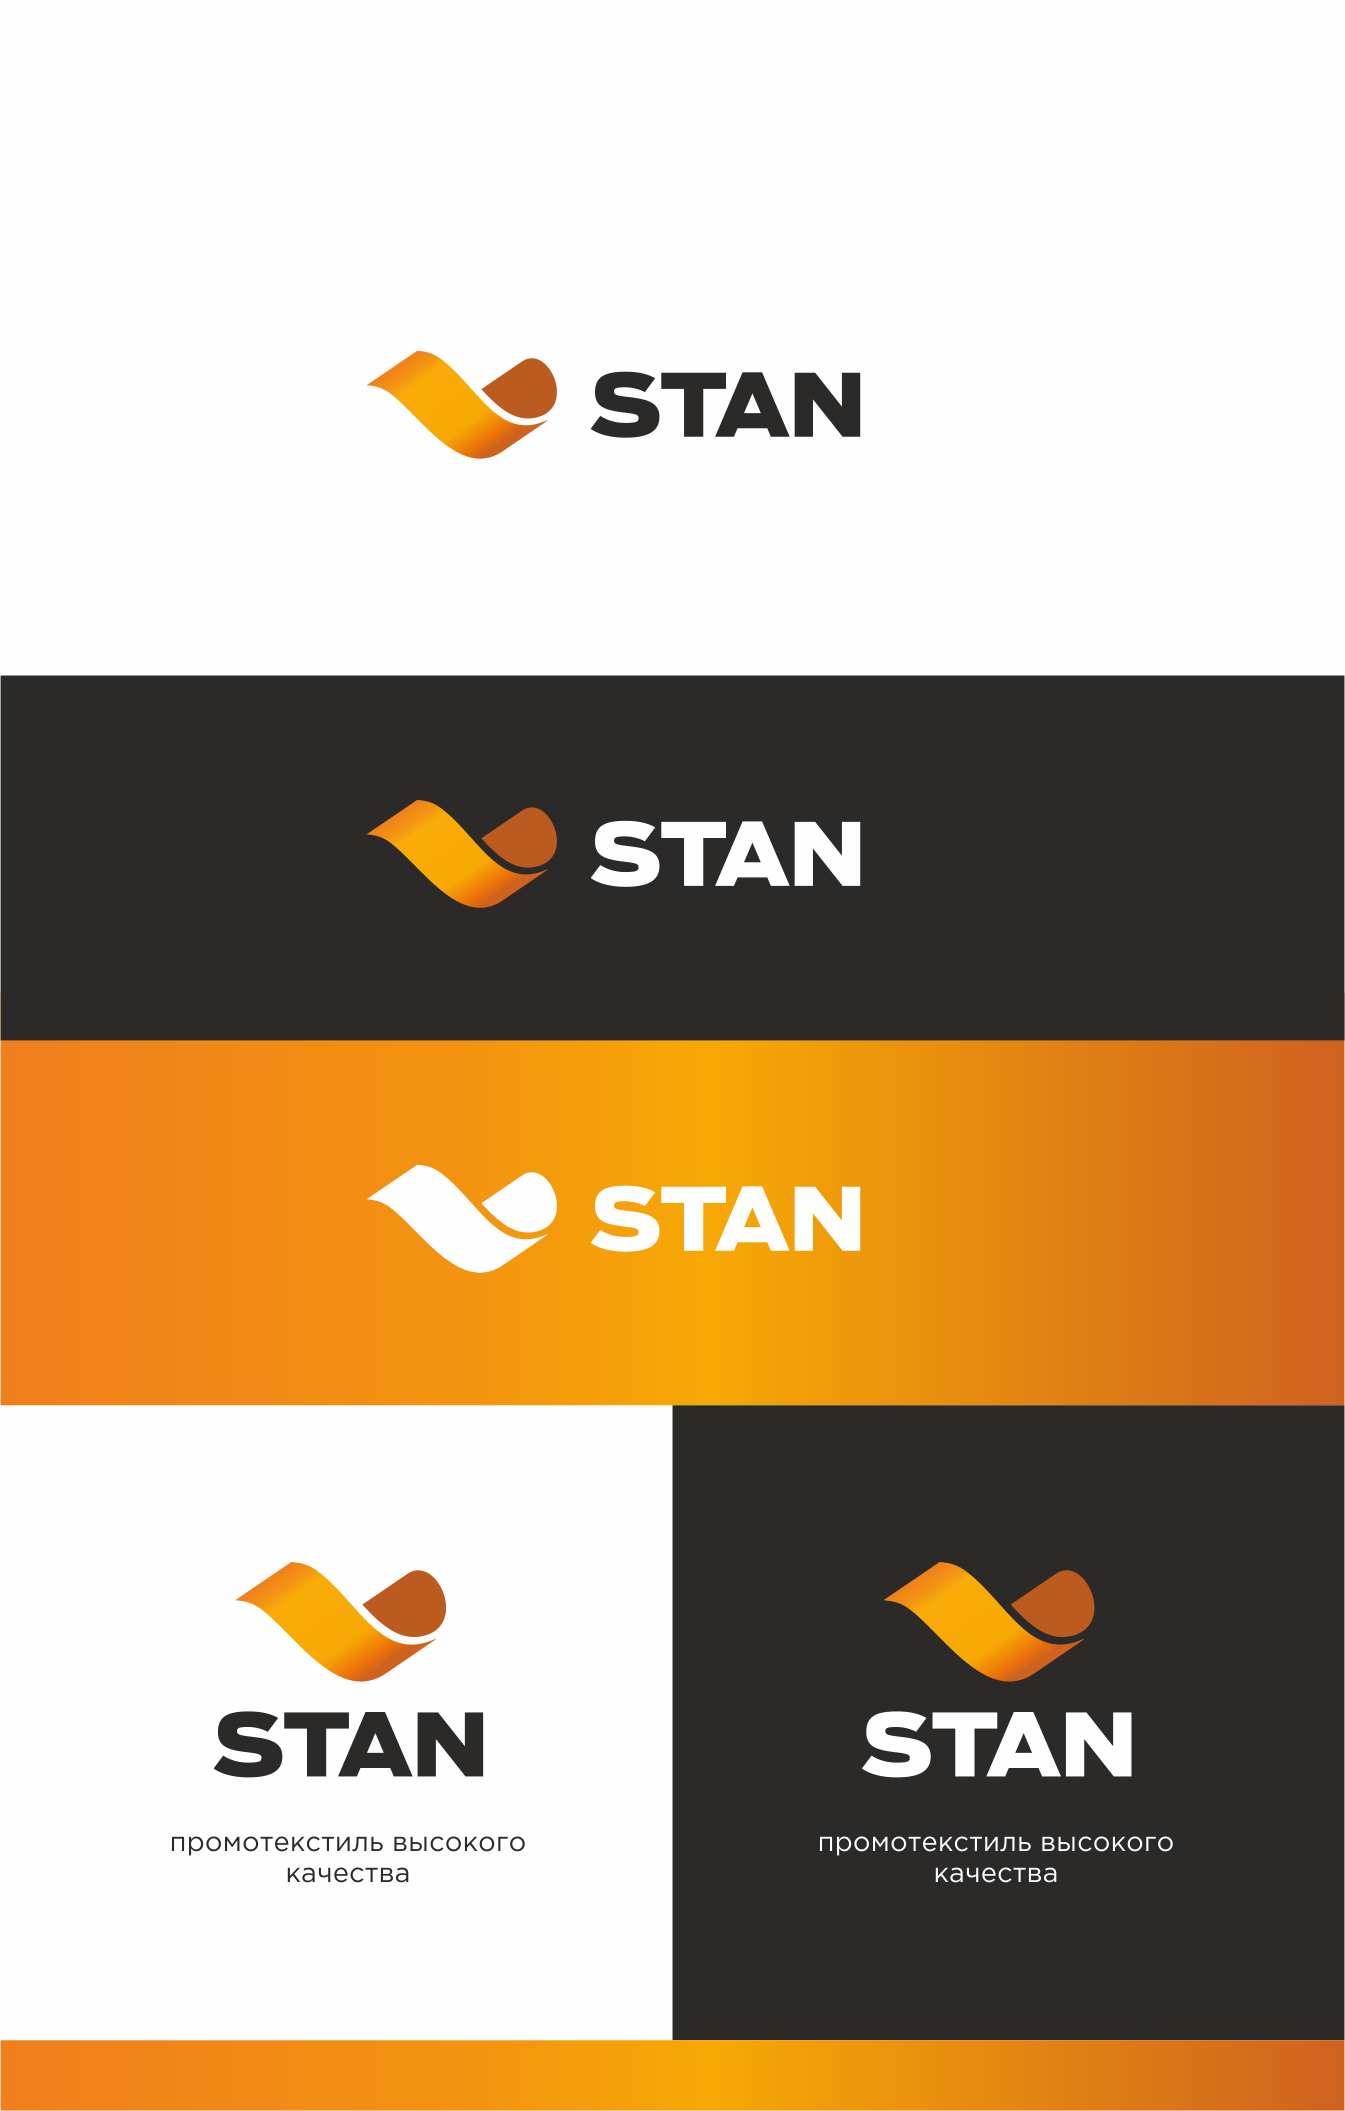 Stan 2.png title=